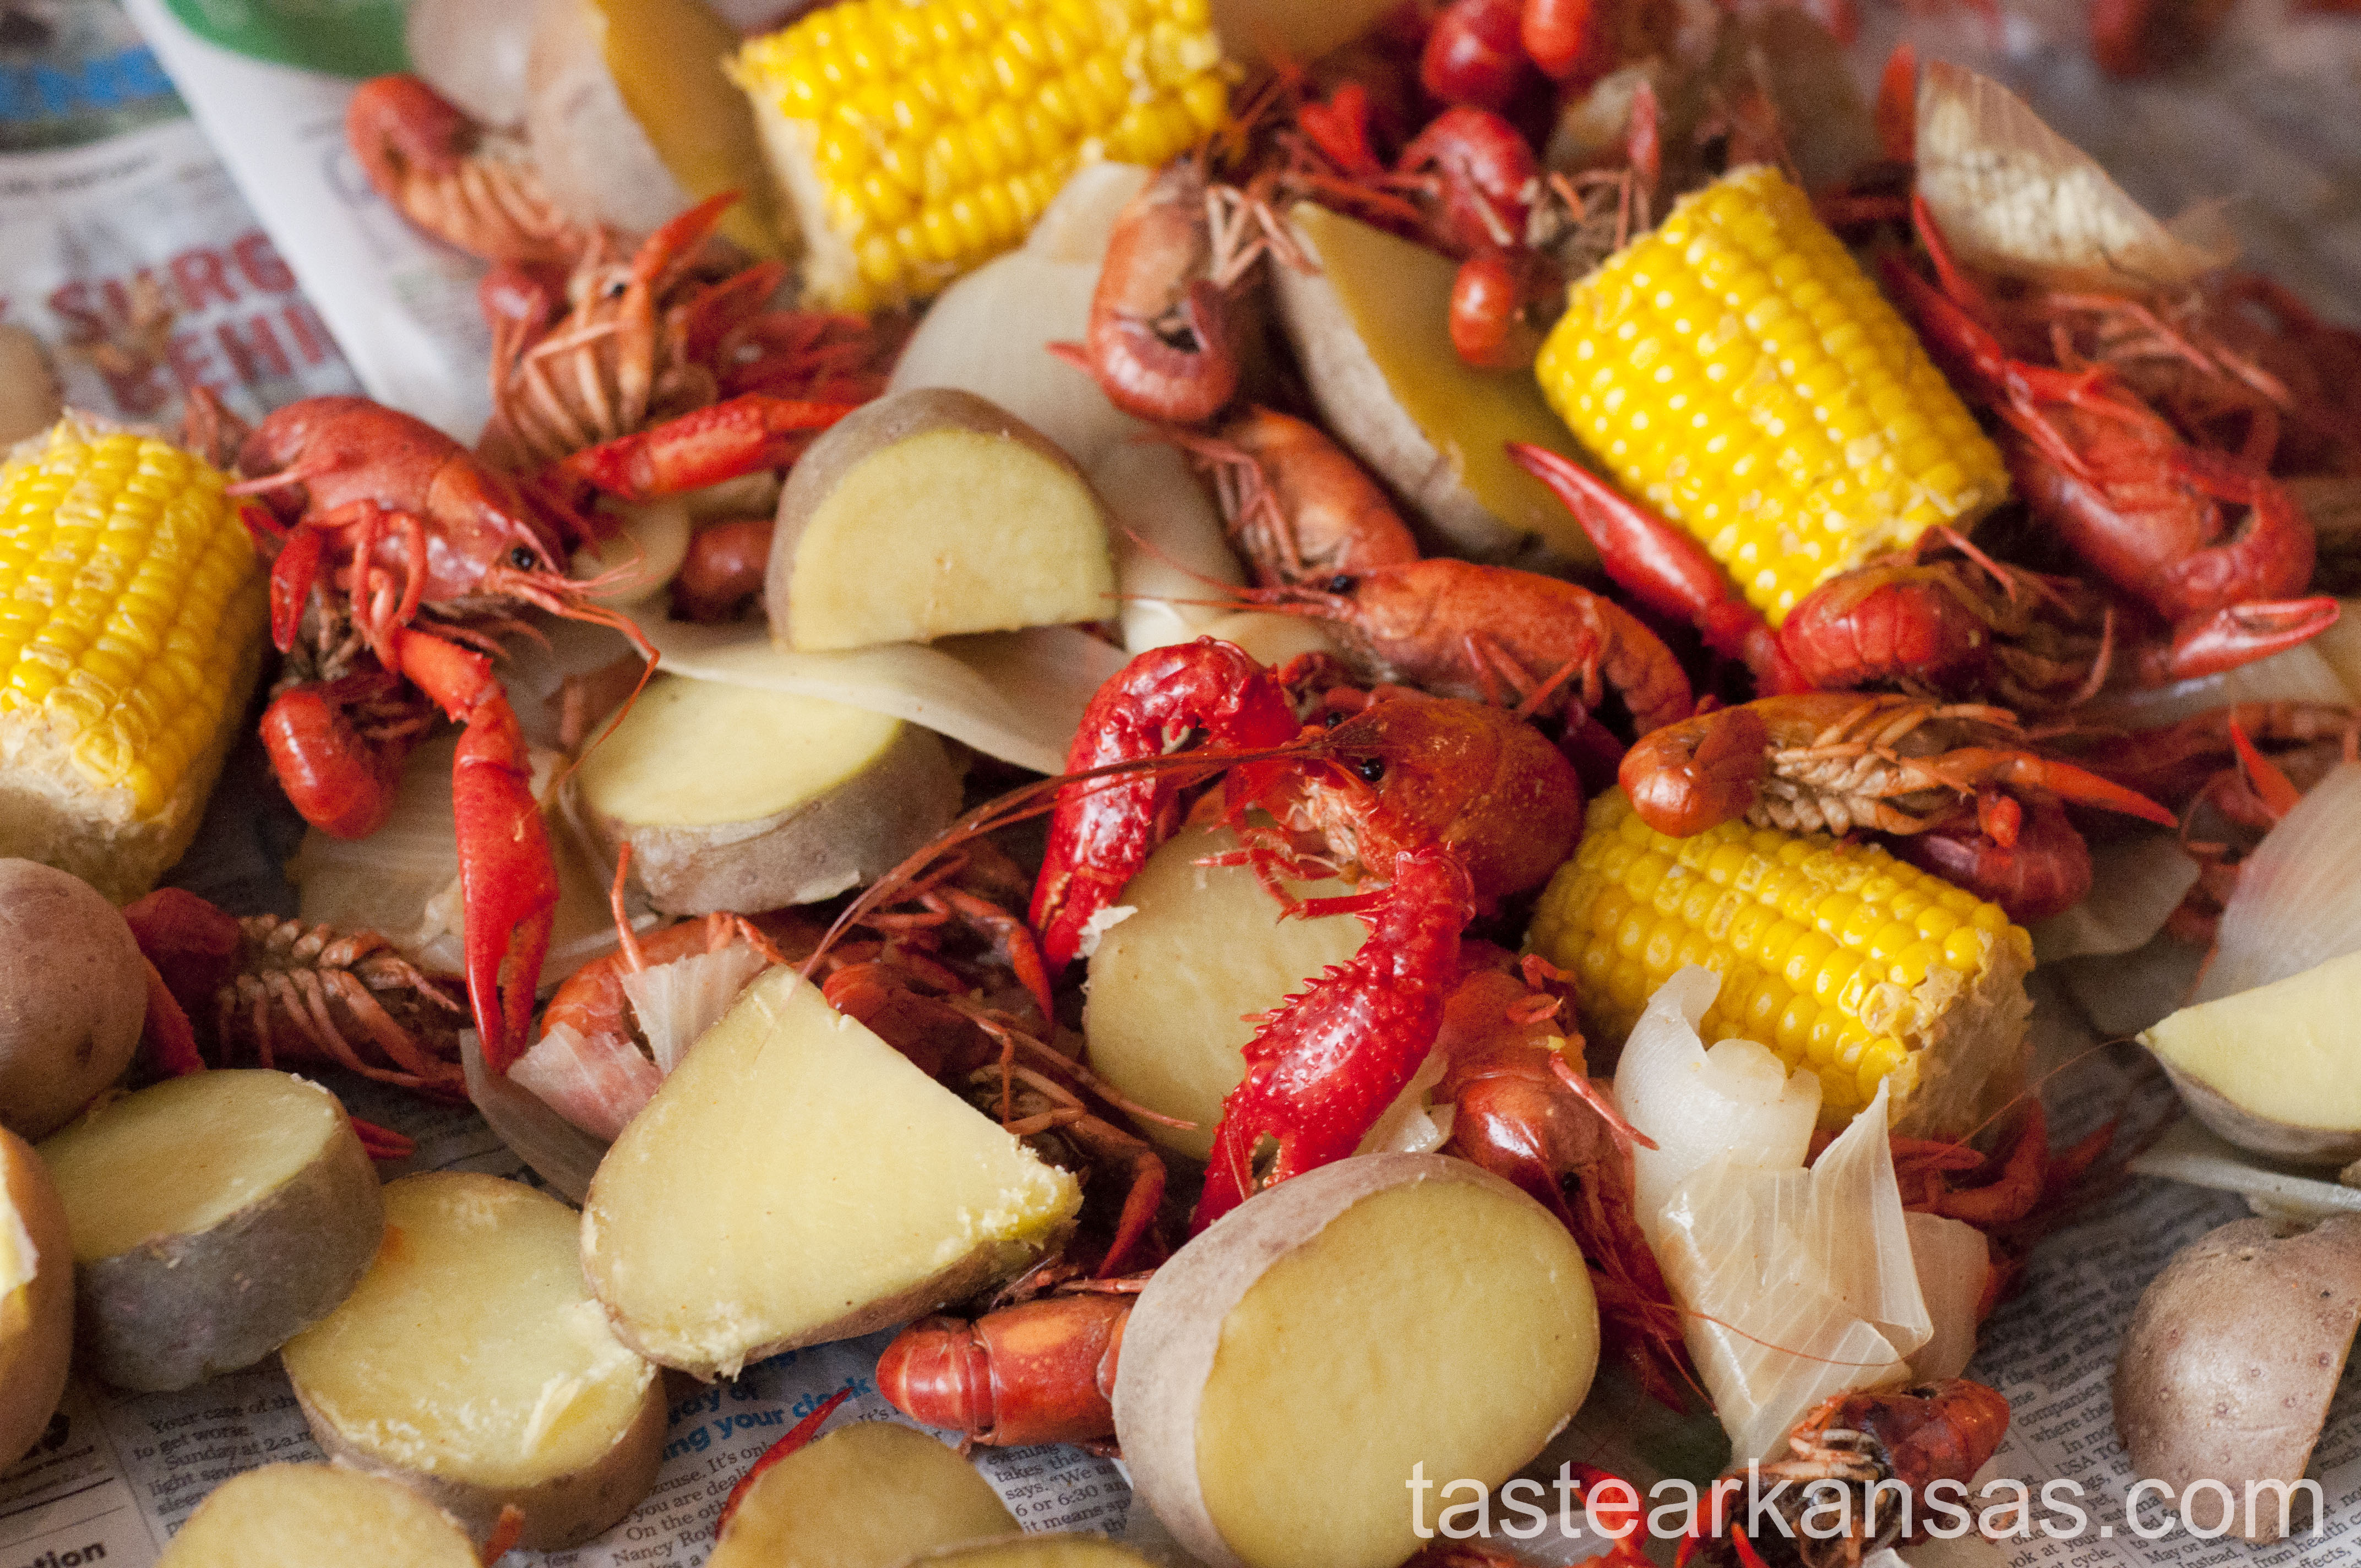 this image is of a crawfish boil, with crawfish, corn, onions, potatoes and garlic on a newspaper covered table